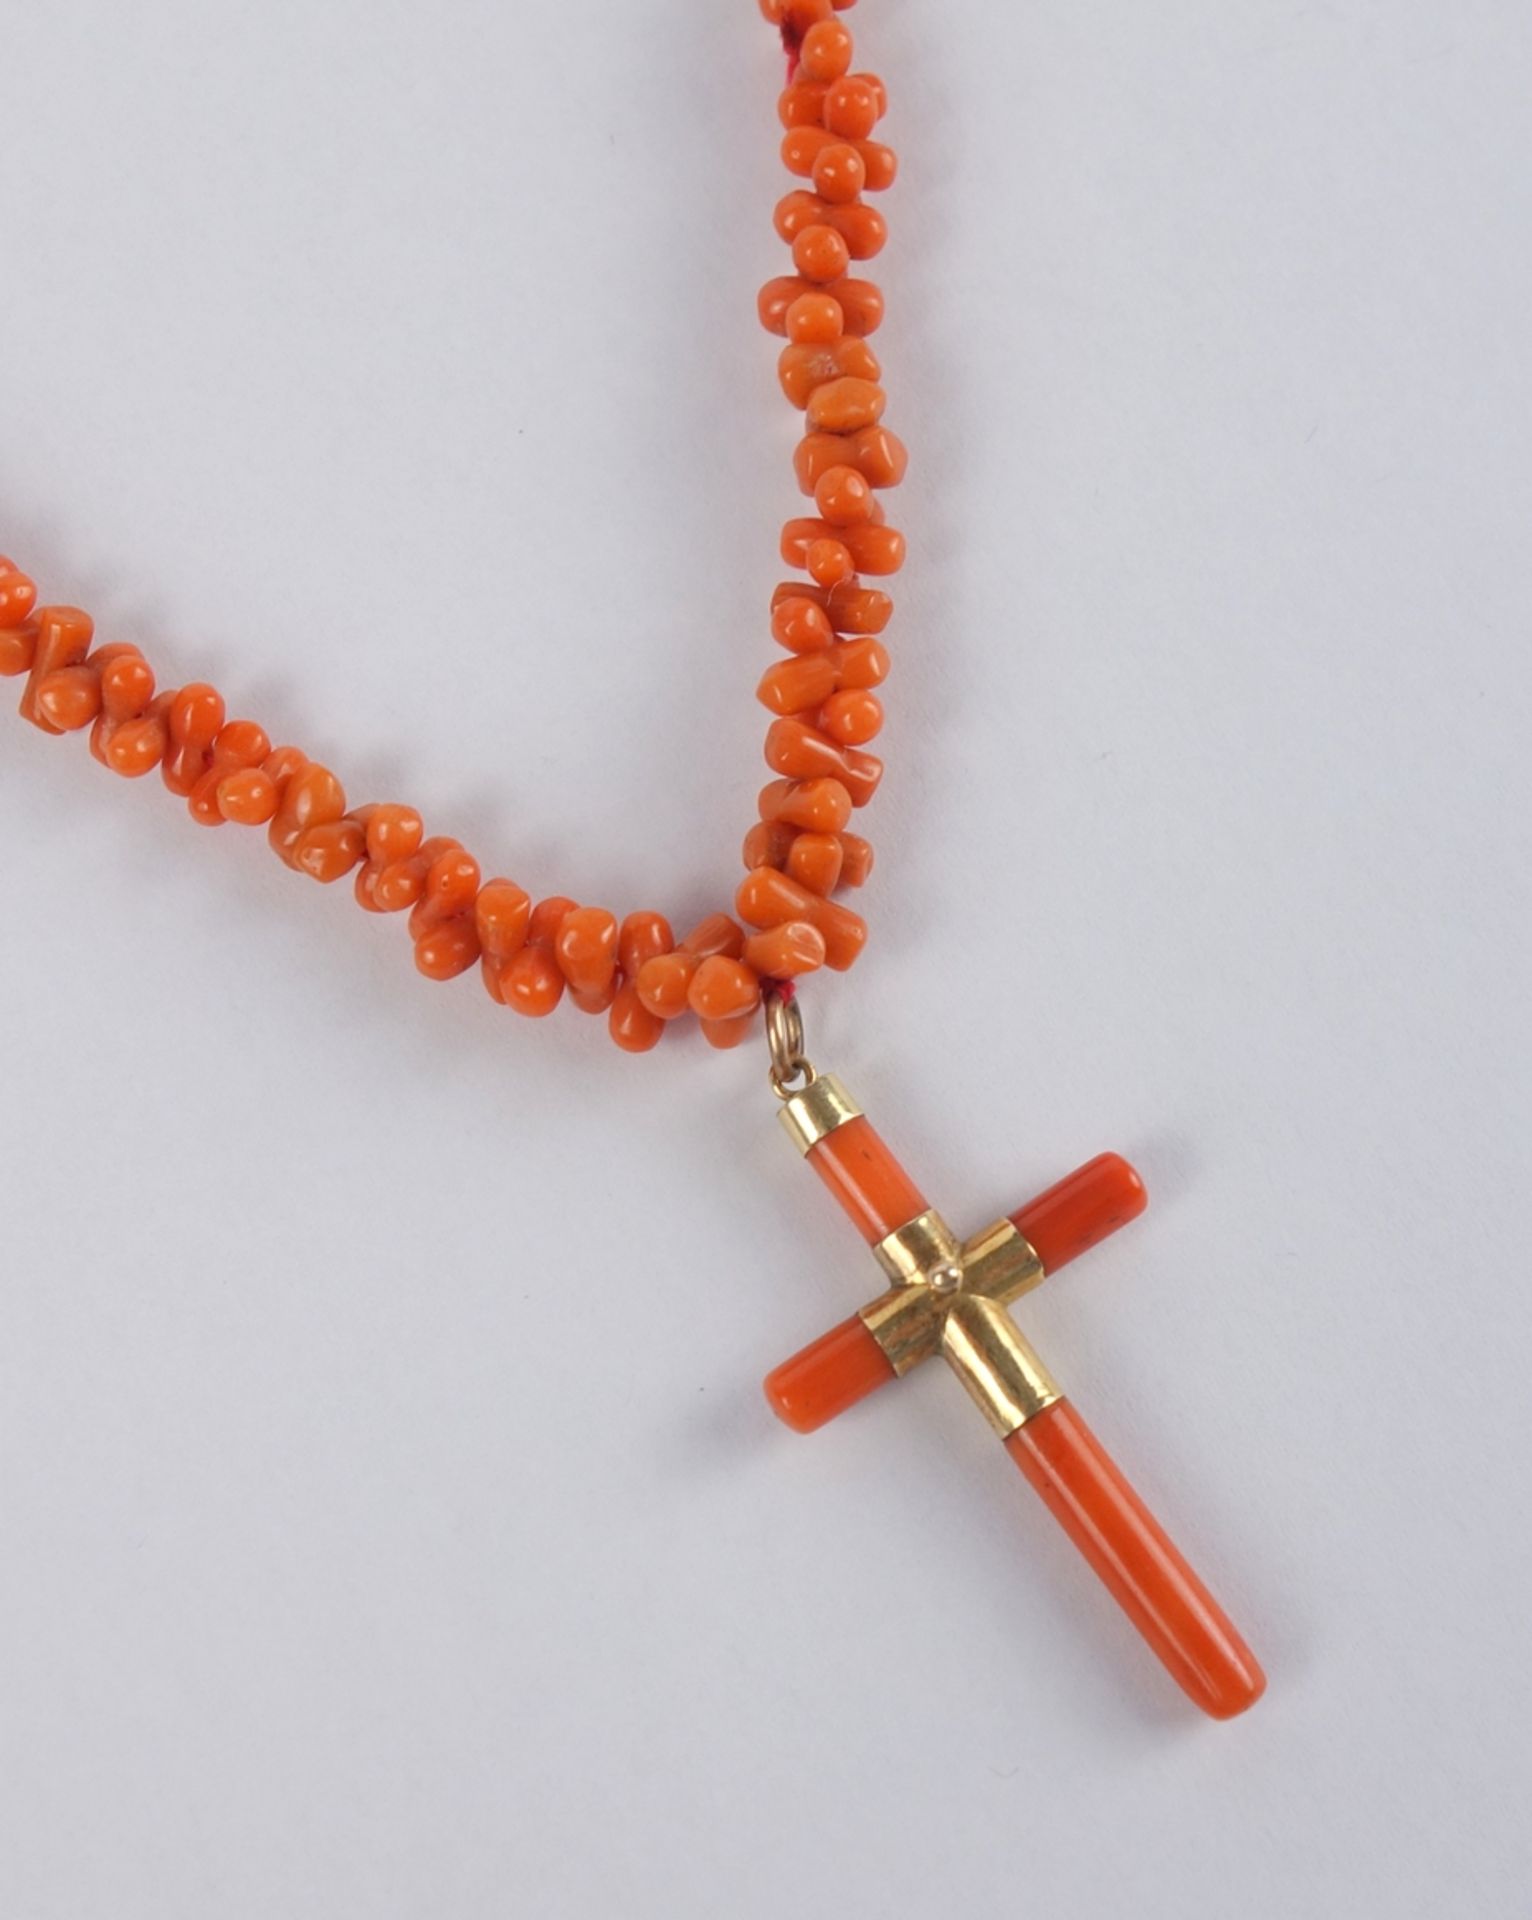 Coral necklace with coral cross pendant, around 1920 - Image 2 of 3